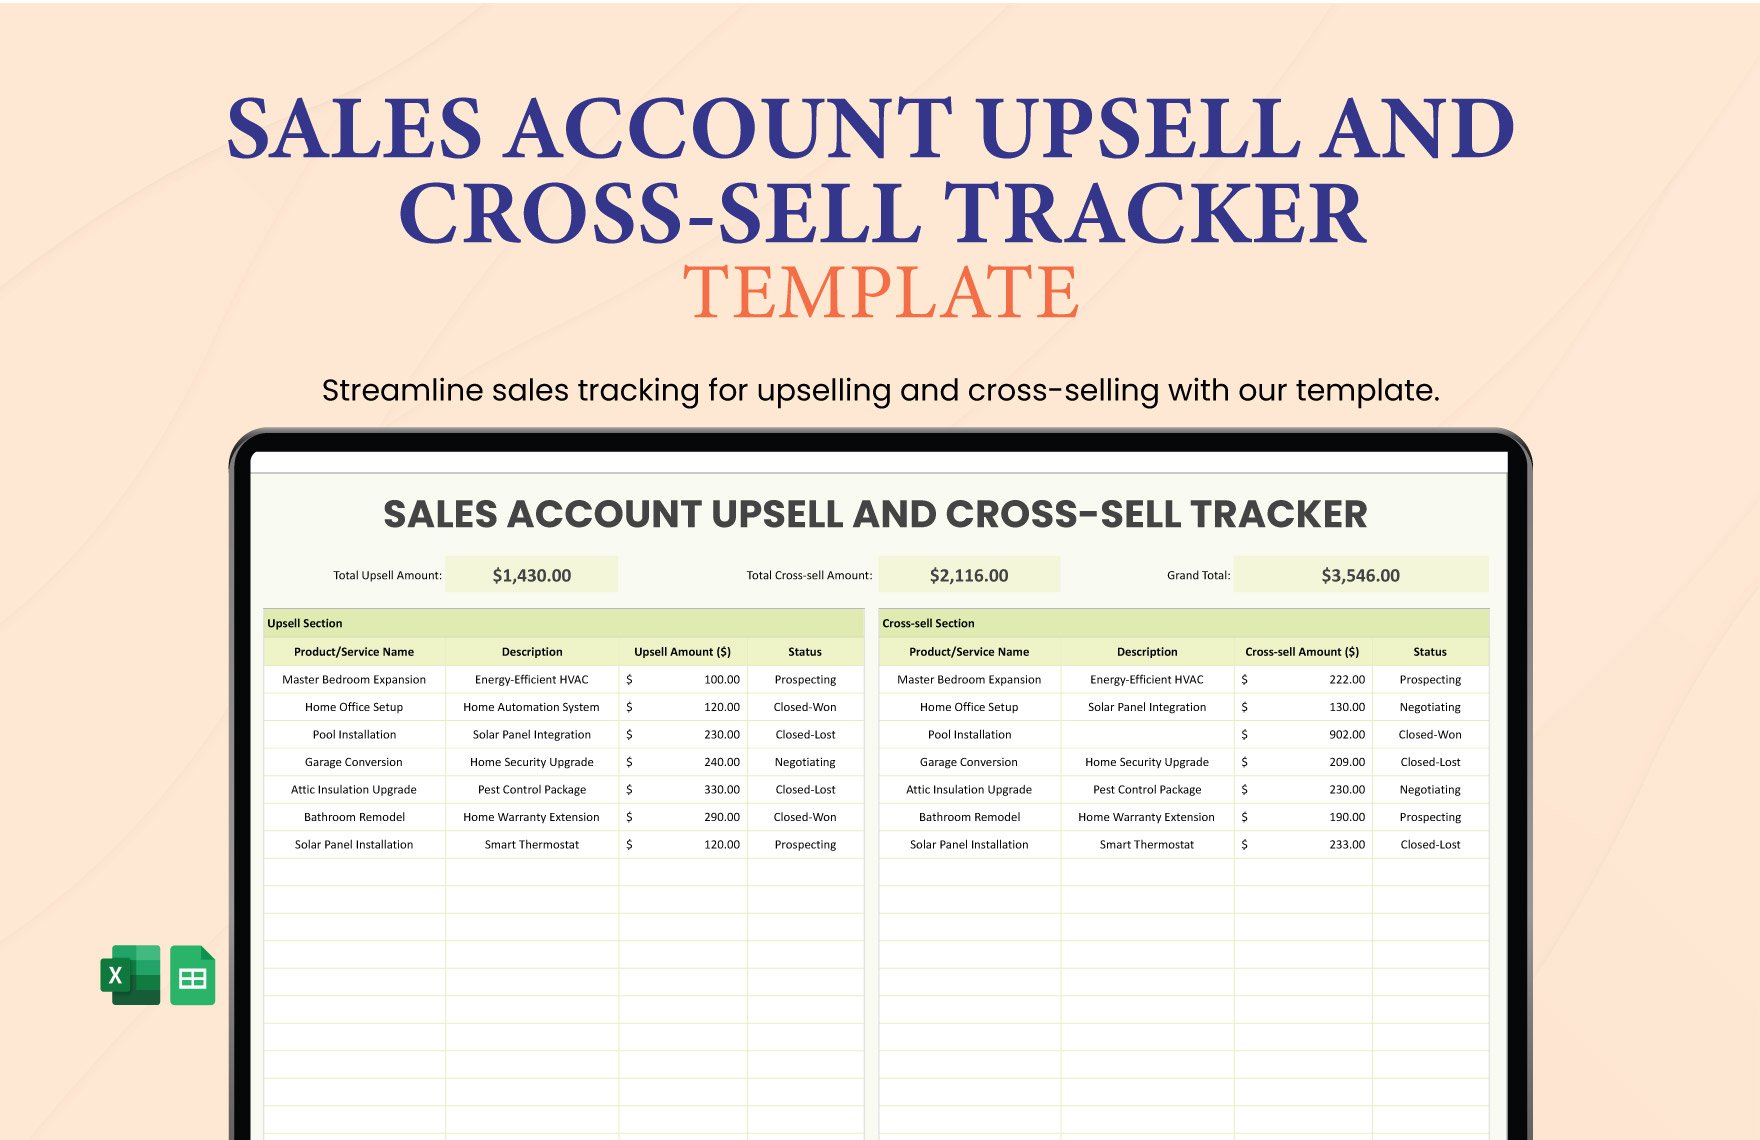 Sales Account Upsell and Cross-sell Tracker Template